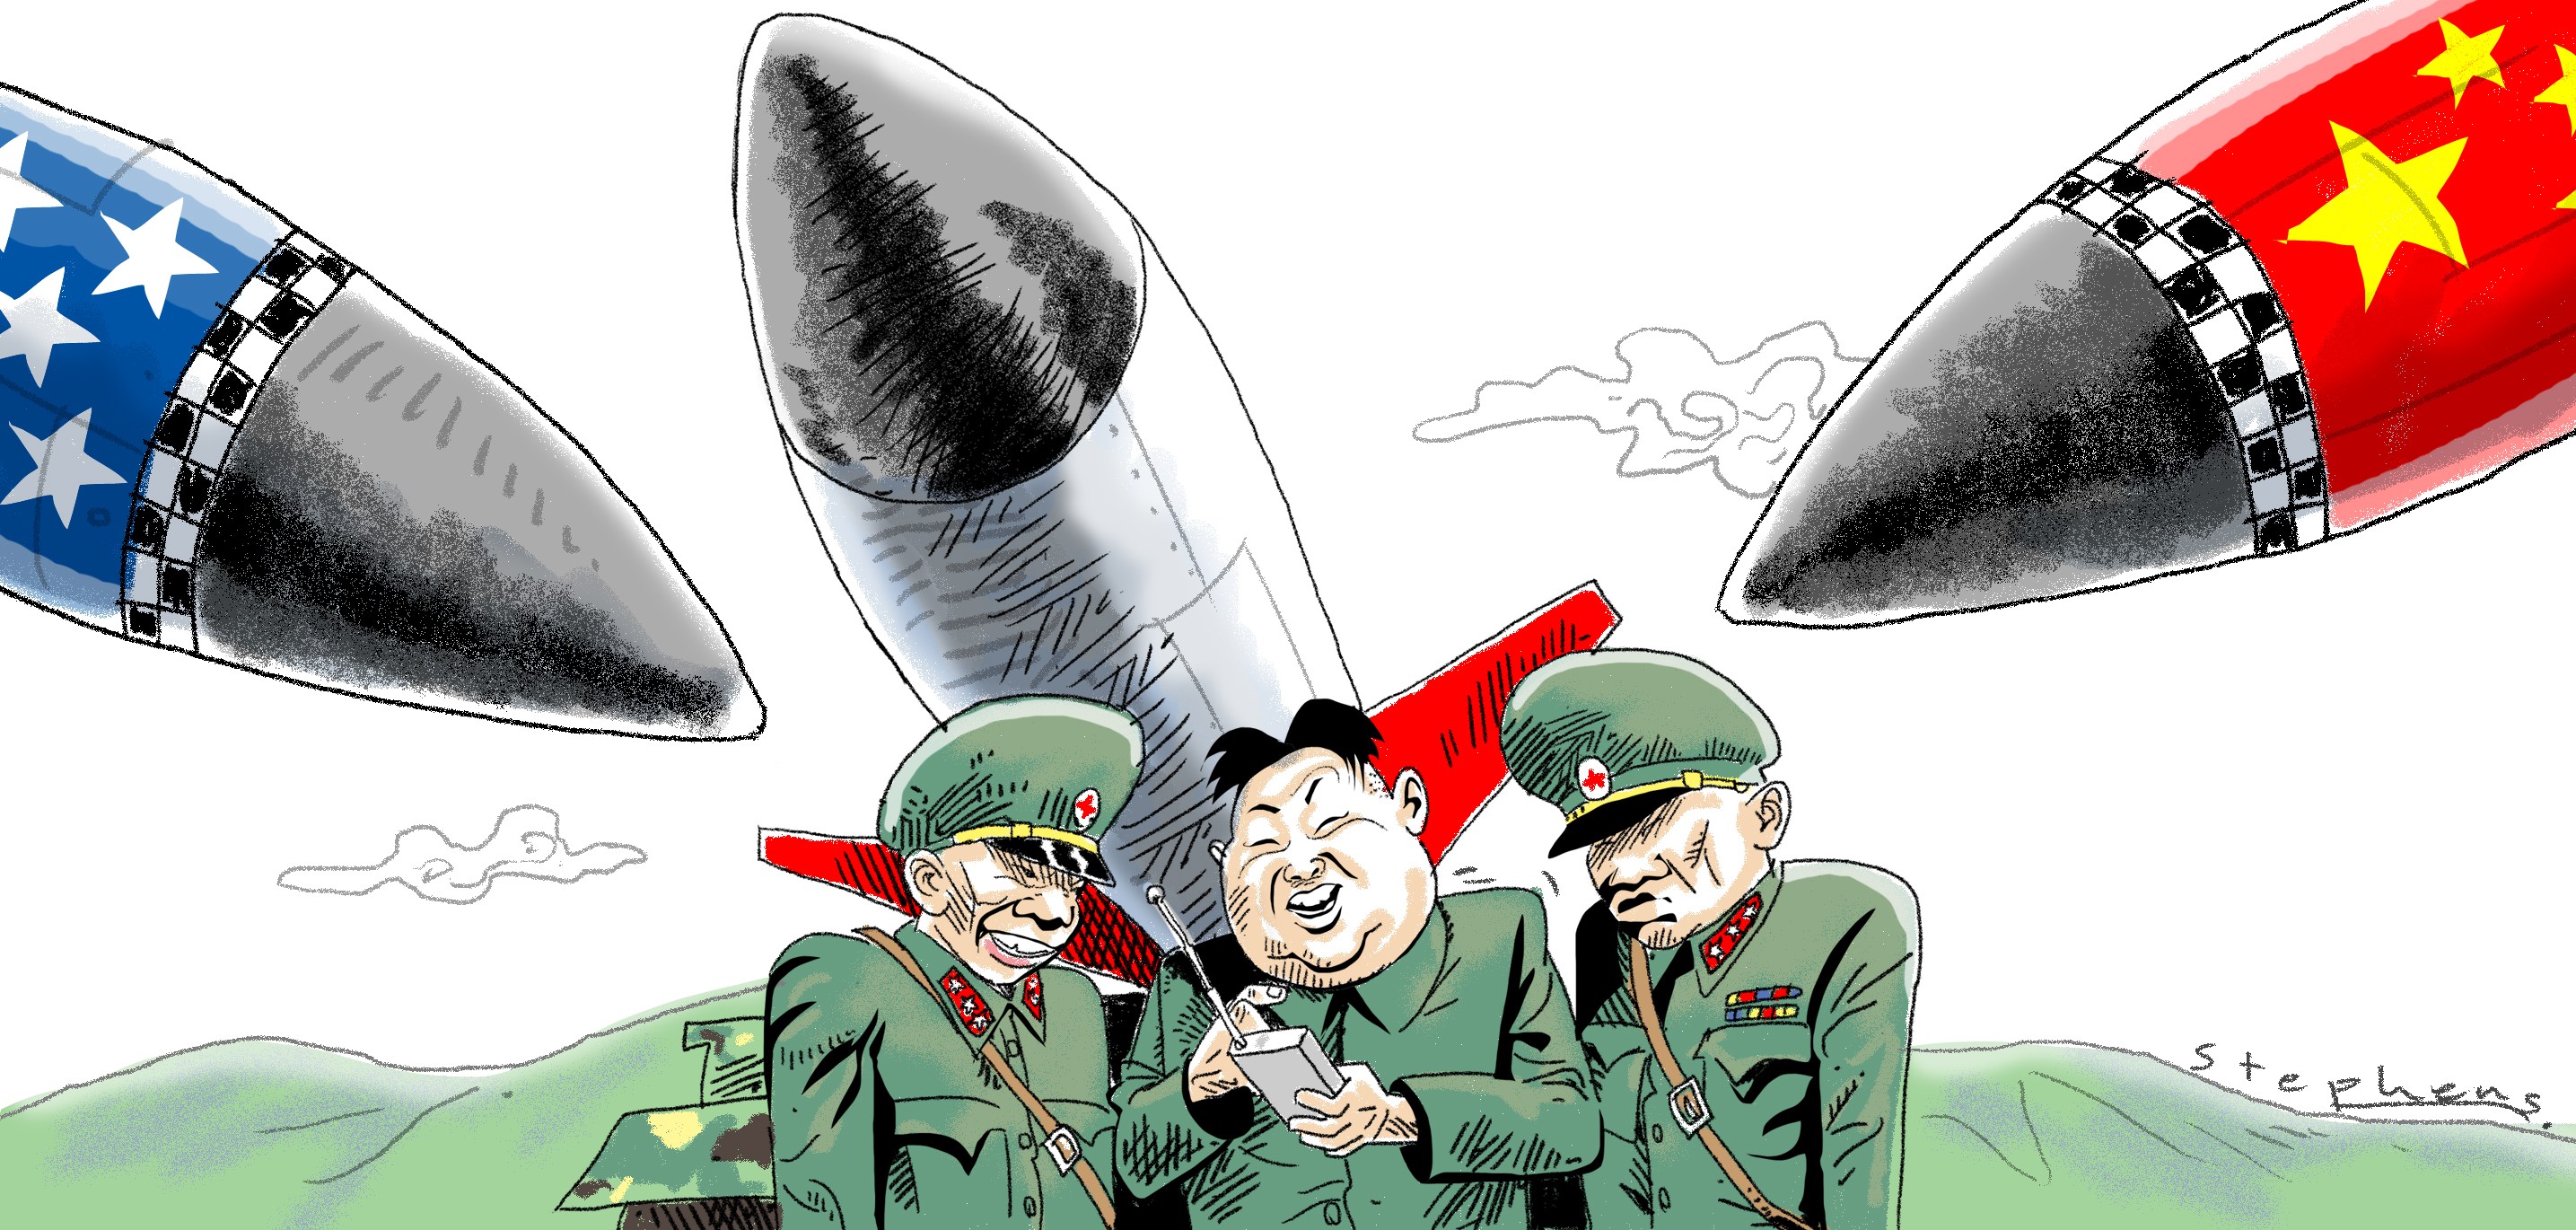 Kim’s nuclear test has pushed China and the US a step closer towards cooperation. Illustration: Craig Stephens